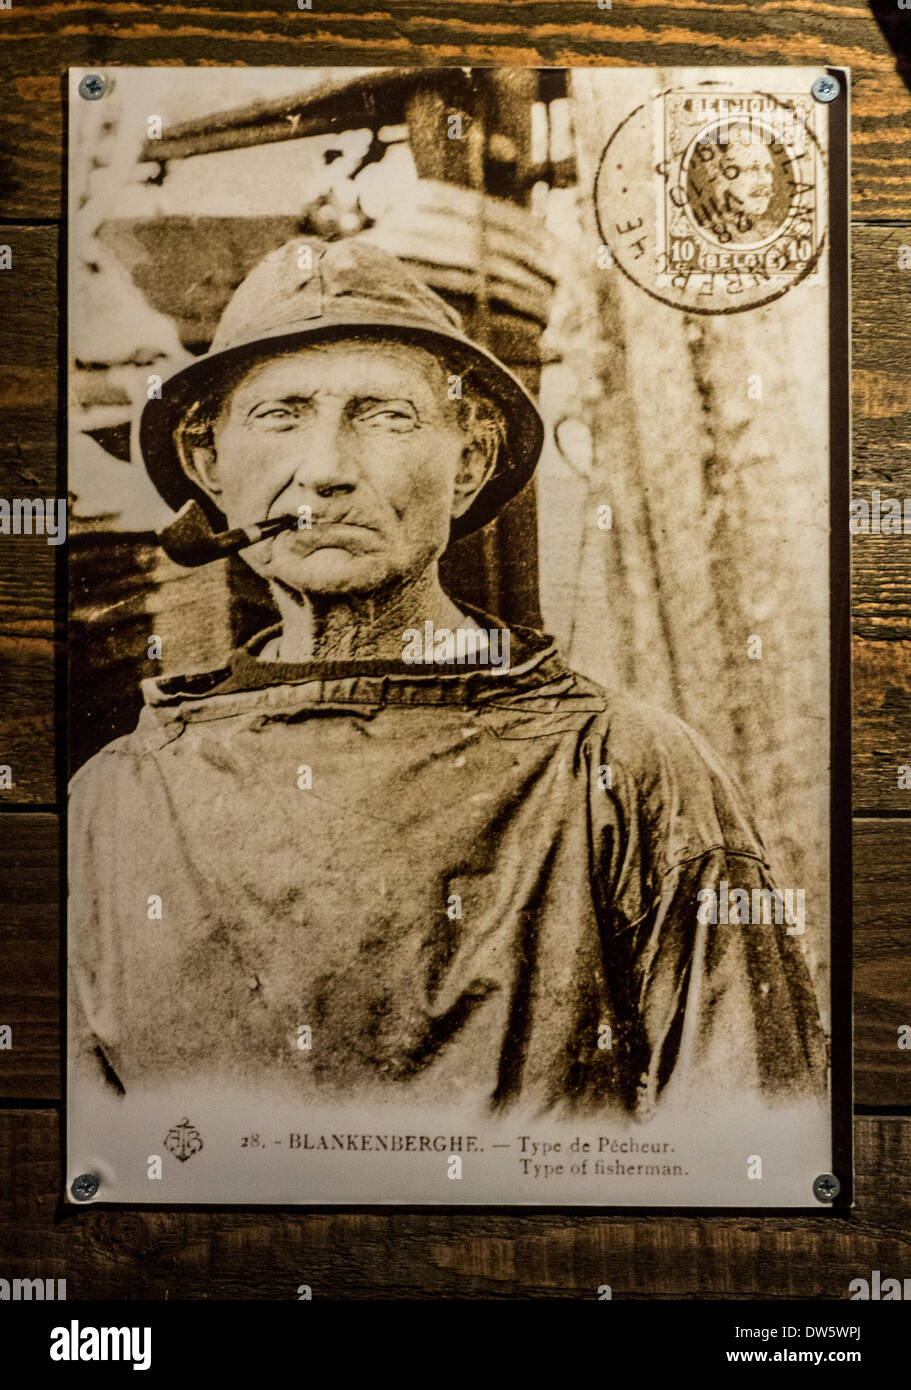 Old archival sepia picture showing close up portrait of fisherman smoking pipe Stock Photo